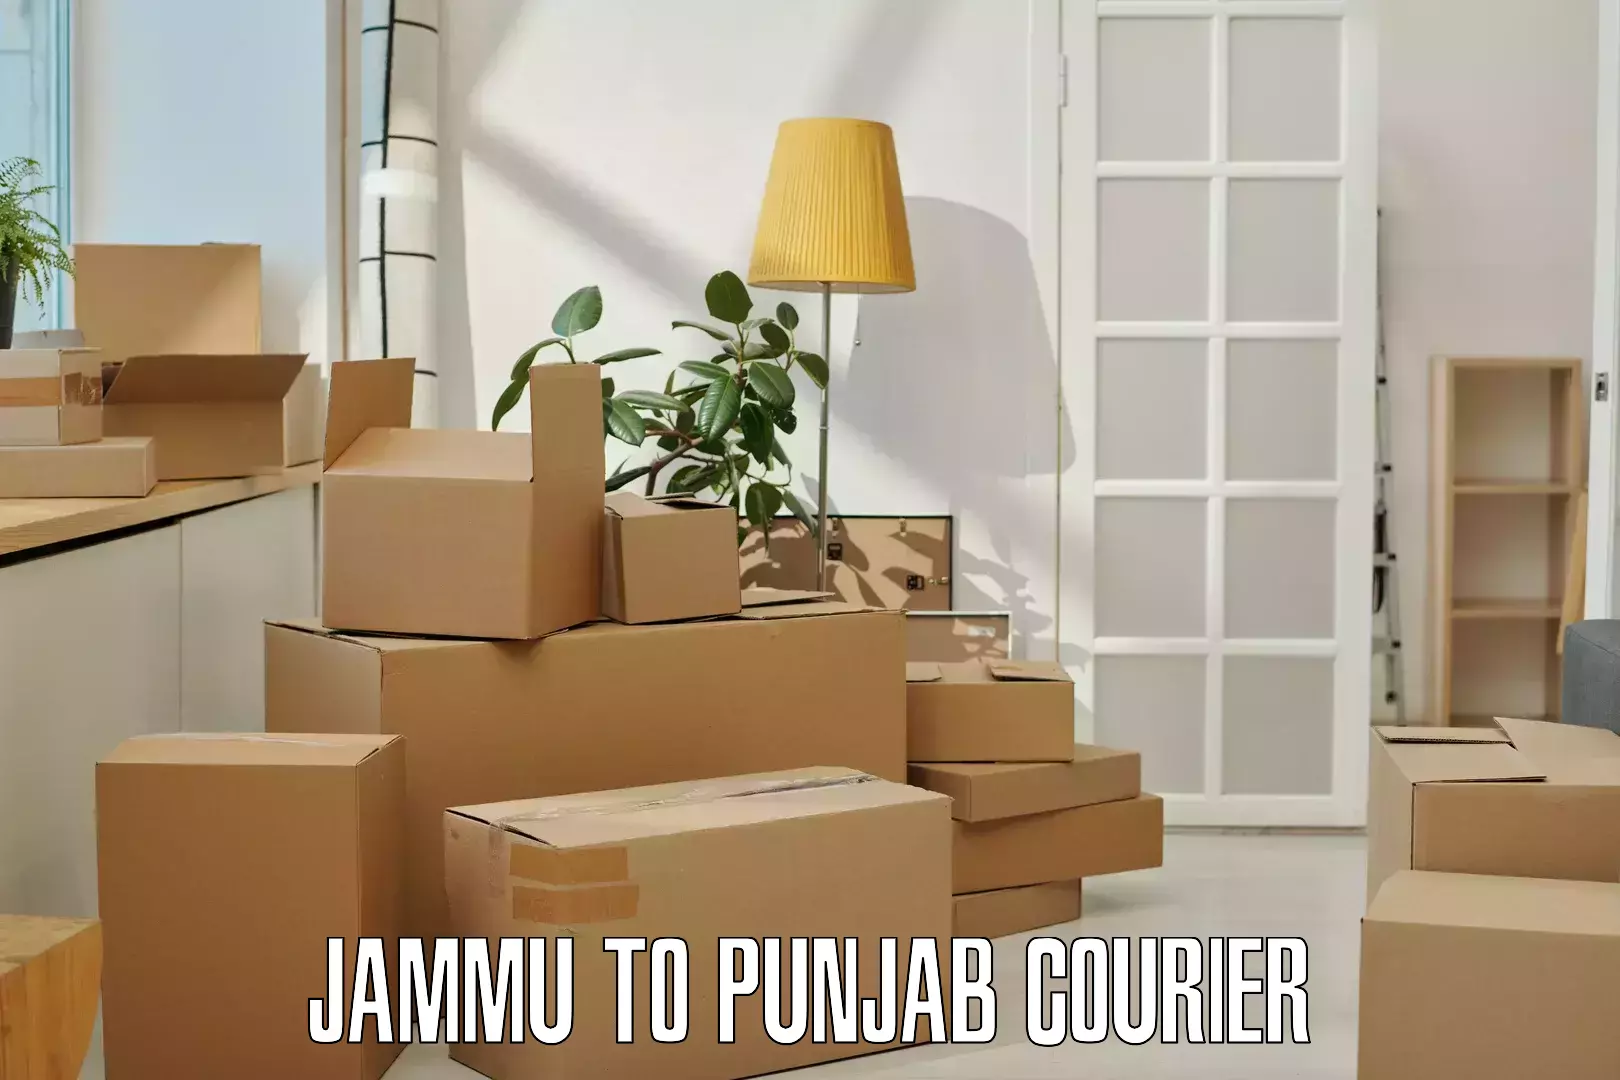 Rural area delivery Jammu to Batala